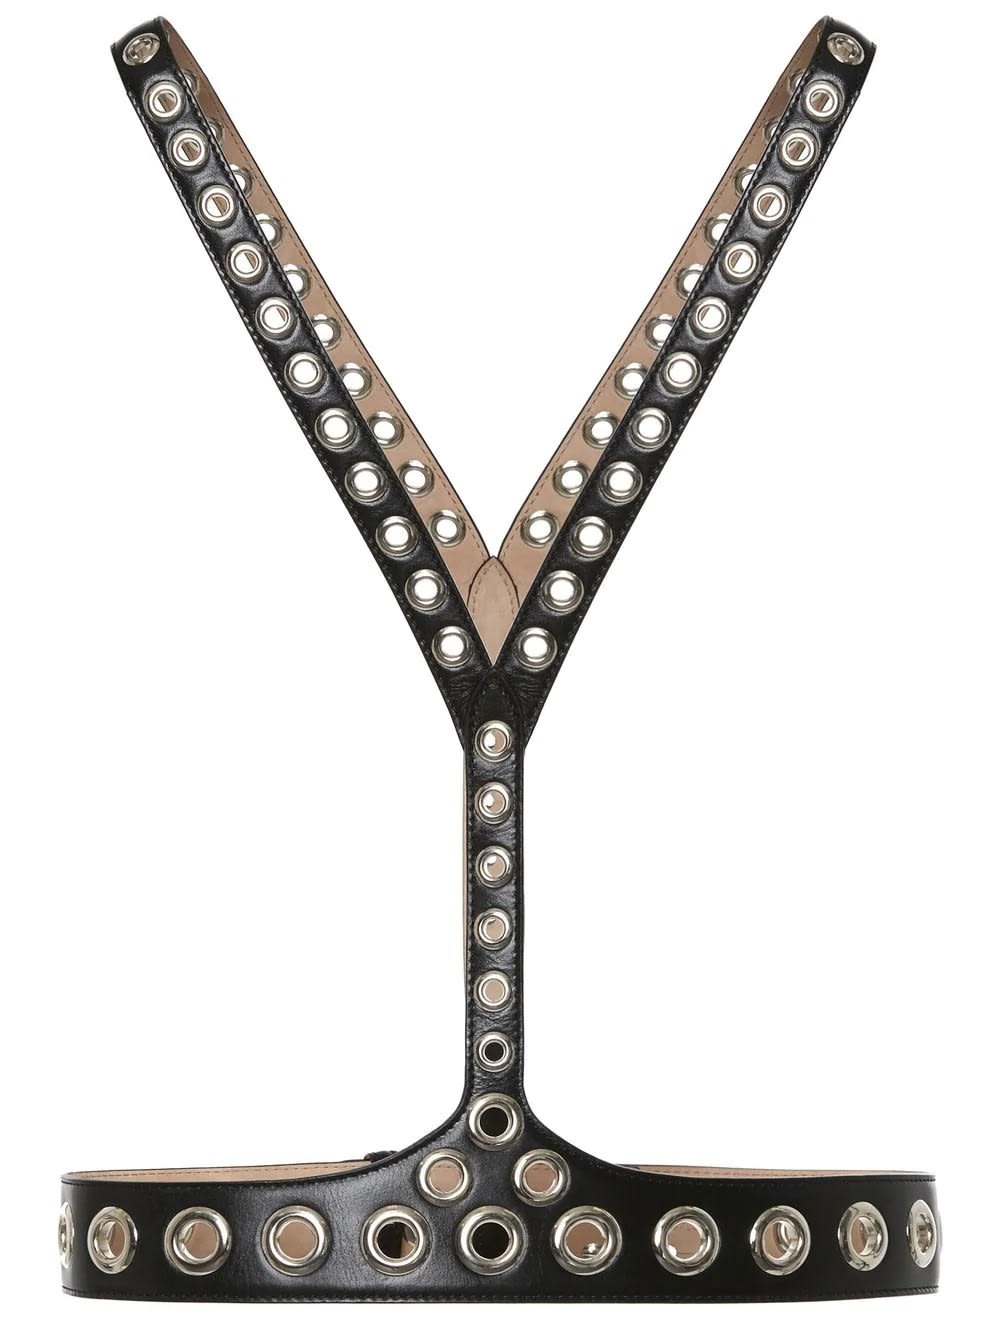 ALEXANDER MCQUEEN BLACK LEATHER HARNESS WITH EYELETS